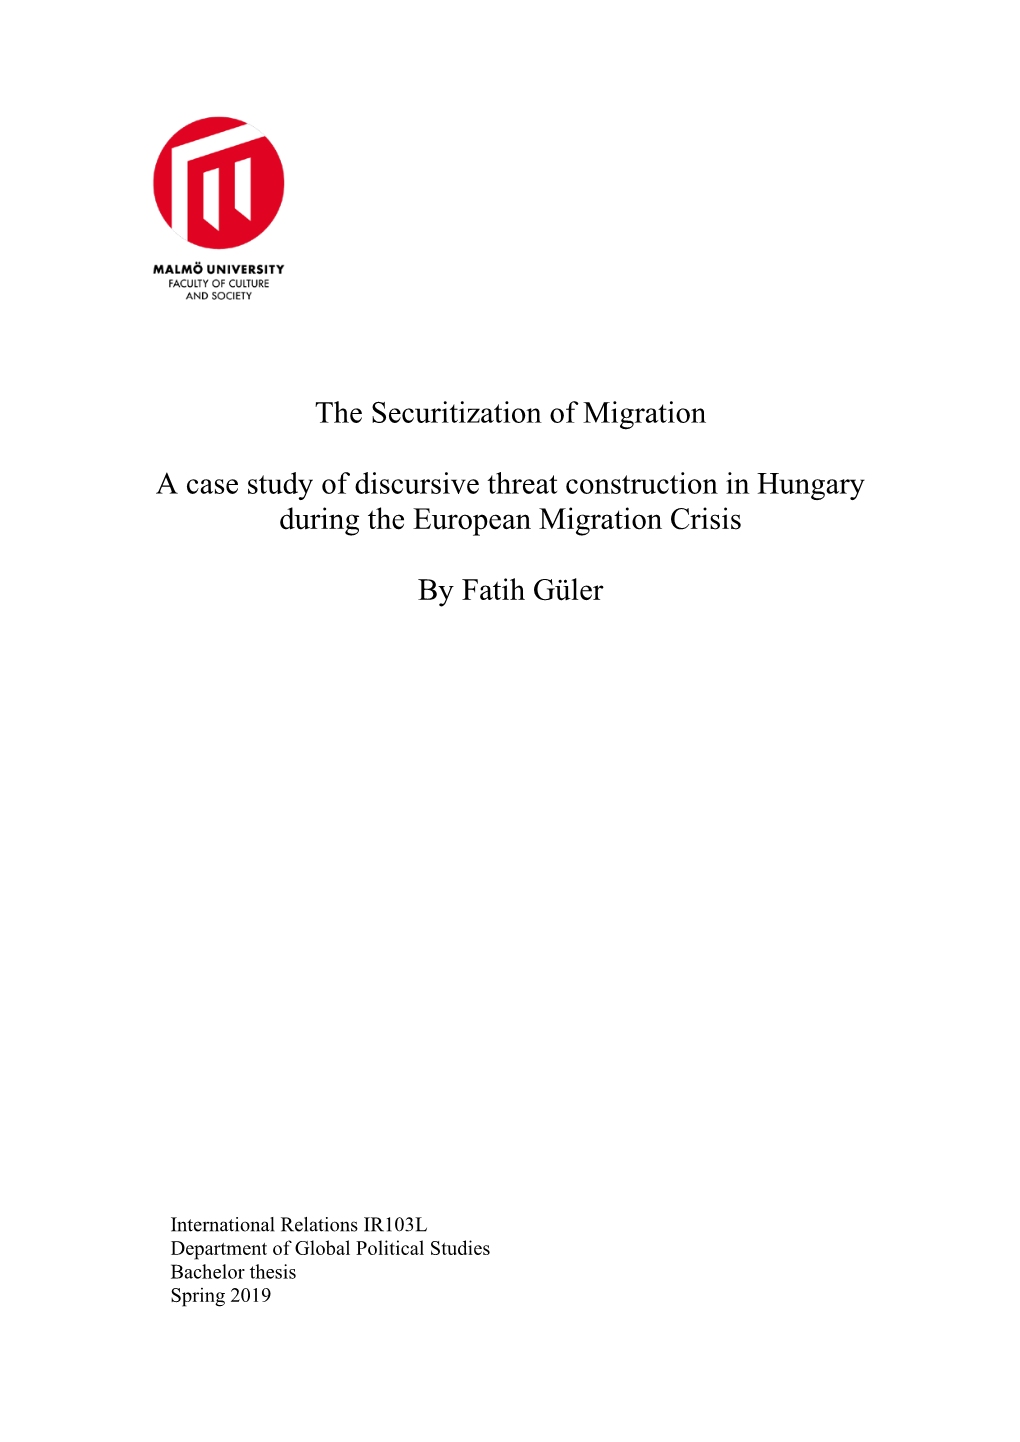 The Securitization of Migration a Case Study of Discursive Threat